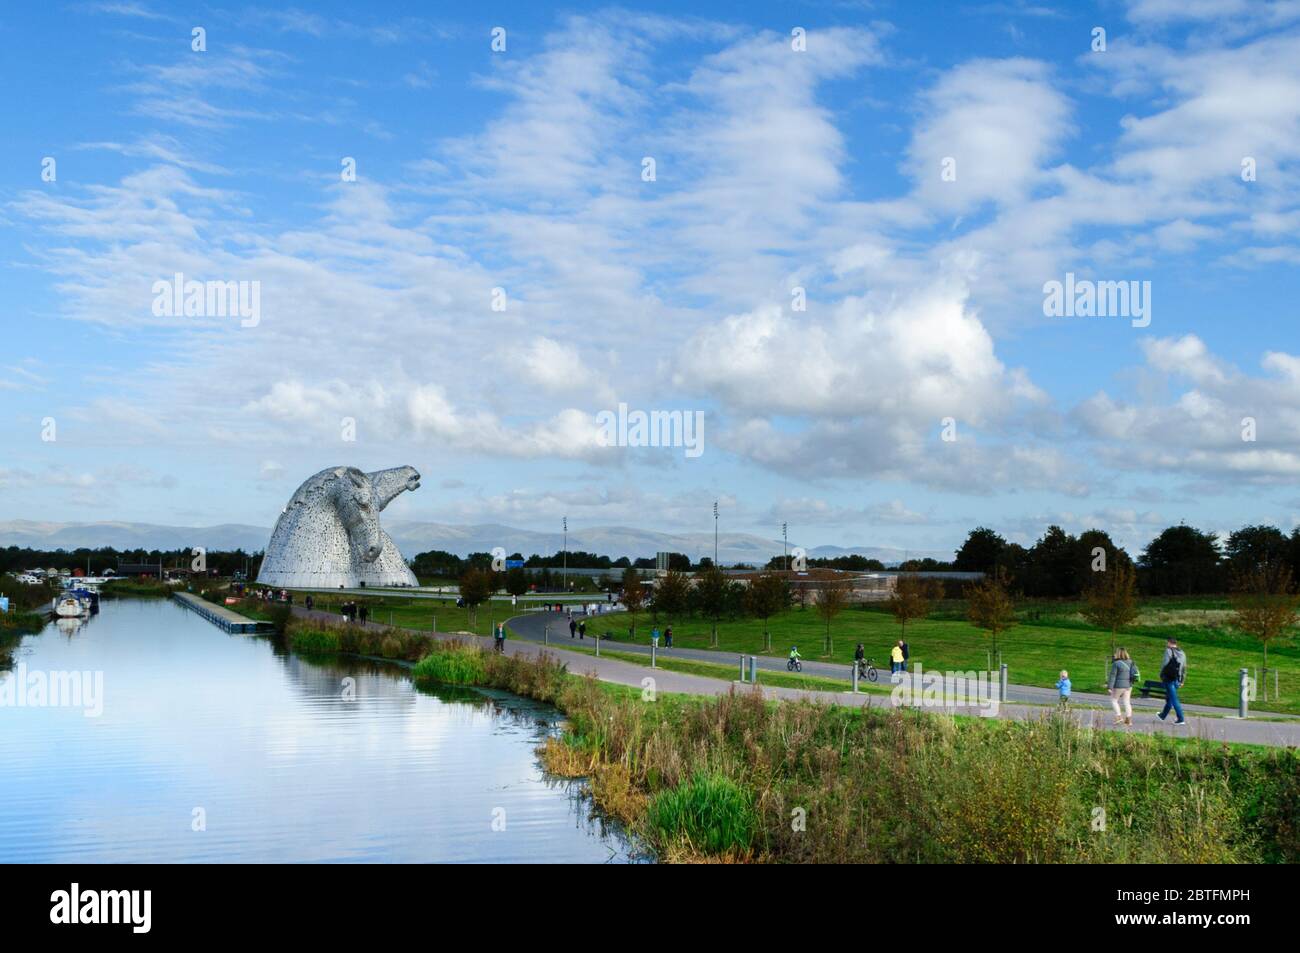 Scotland - Oct 8th '16 The Kelpies by Andy Scott - Kelpies are mythological water spirits & inspired this 30m high monument to horse powered heritage Stock Photo